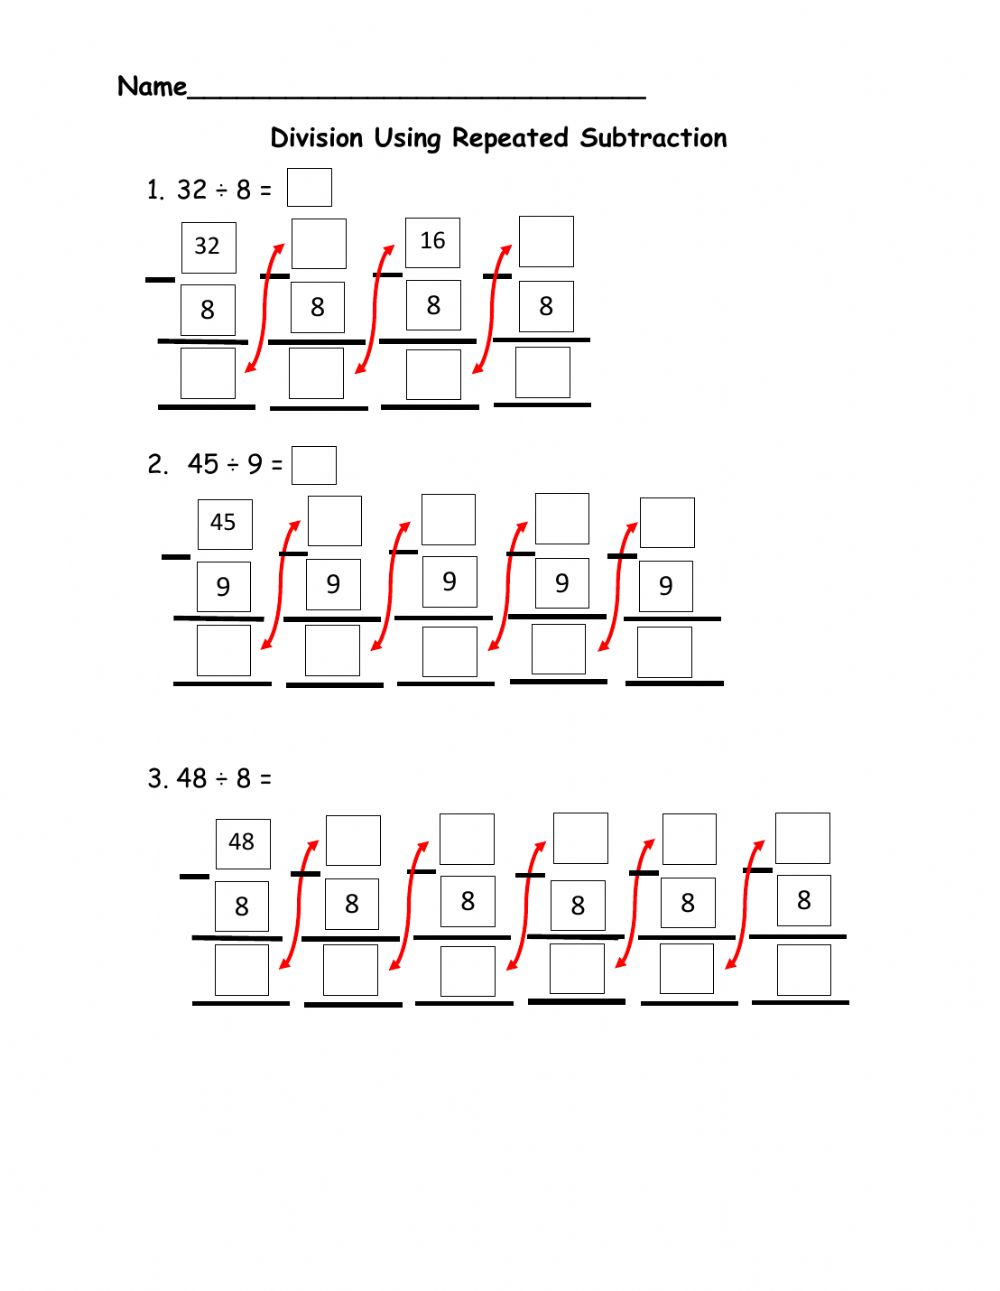 Division Using Repeated Subtraction Worksheet